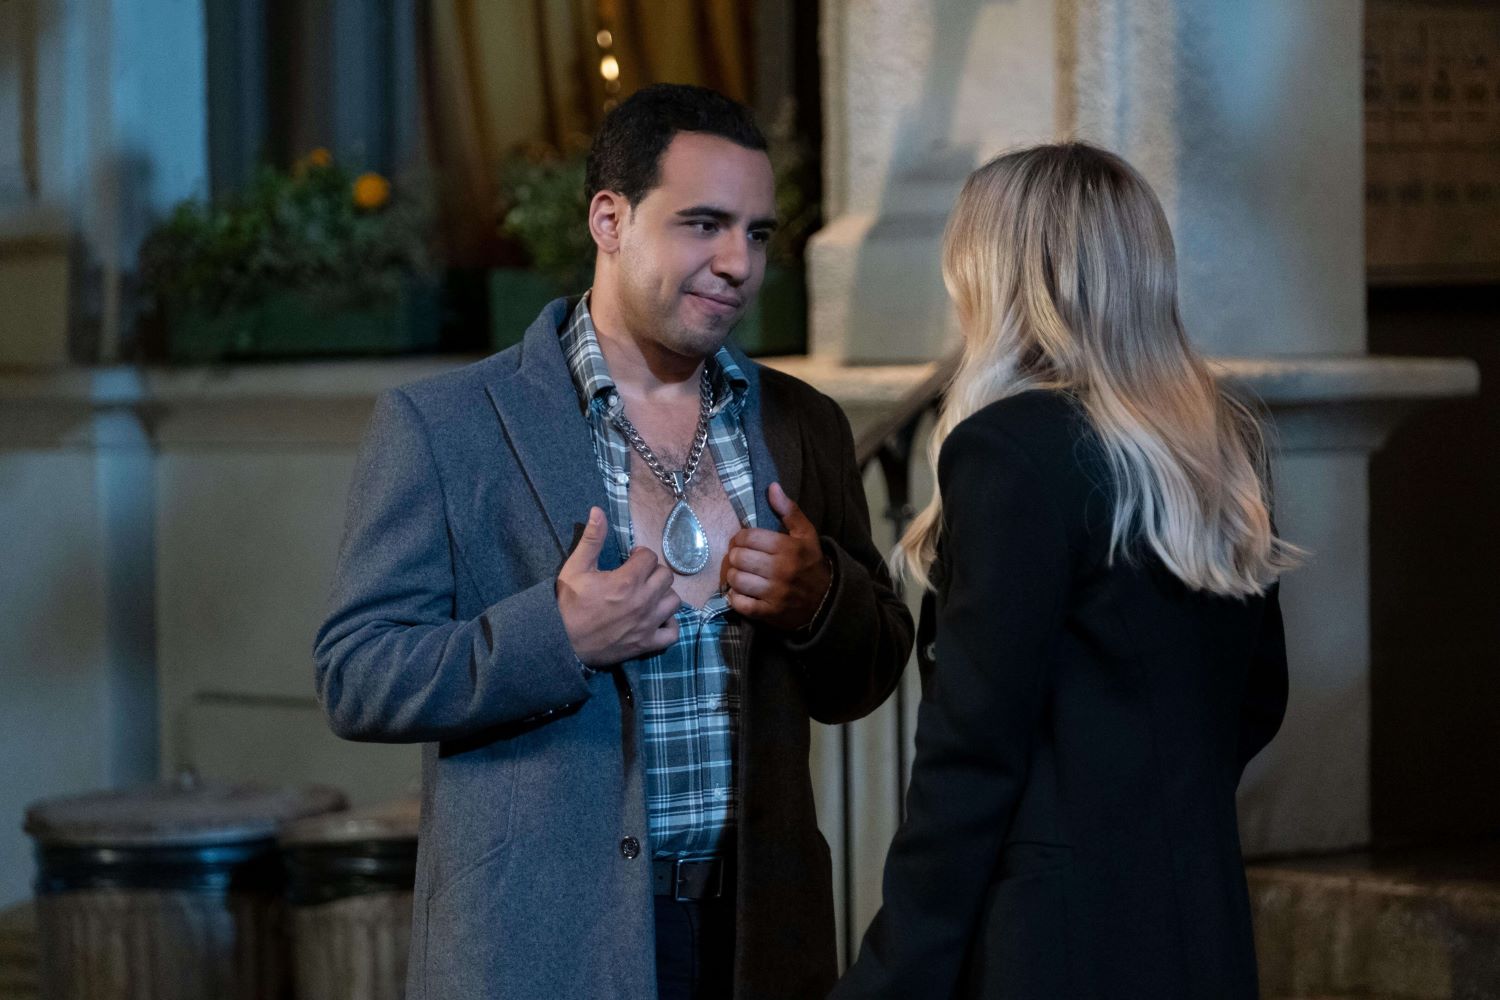 Victor Rasuk and Hilary Duff, in character as Oscar and Sophie in 'How I Met Your Father' Season 2 Episode 6, share a scene. Oscar wears a gray coat over a green and white plaid button-up shirt and huge diamond necklace. Sophie wears a black coat.